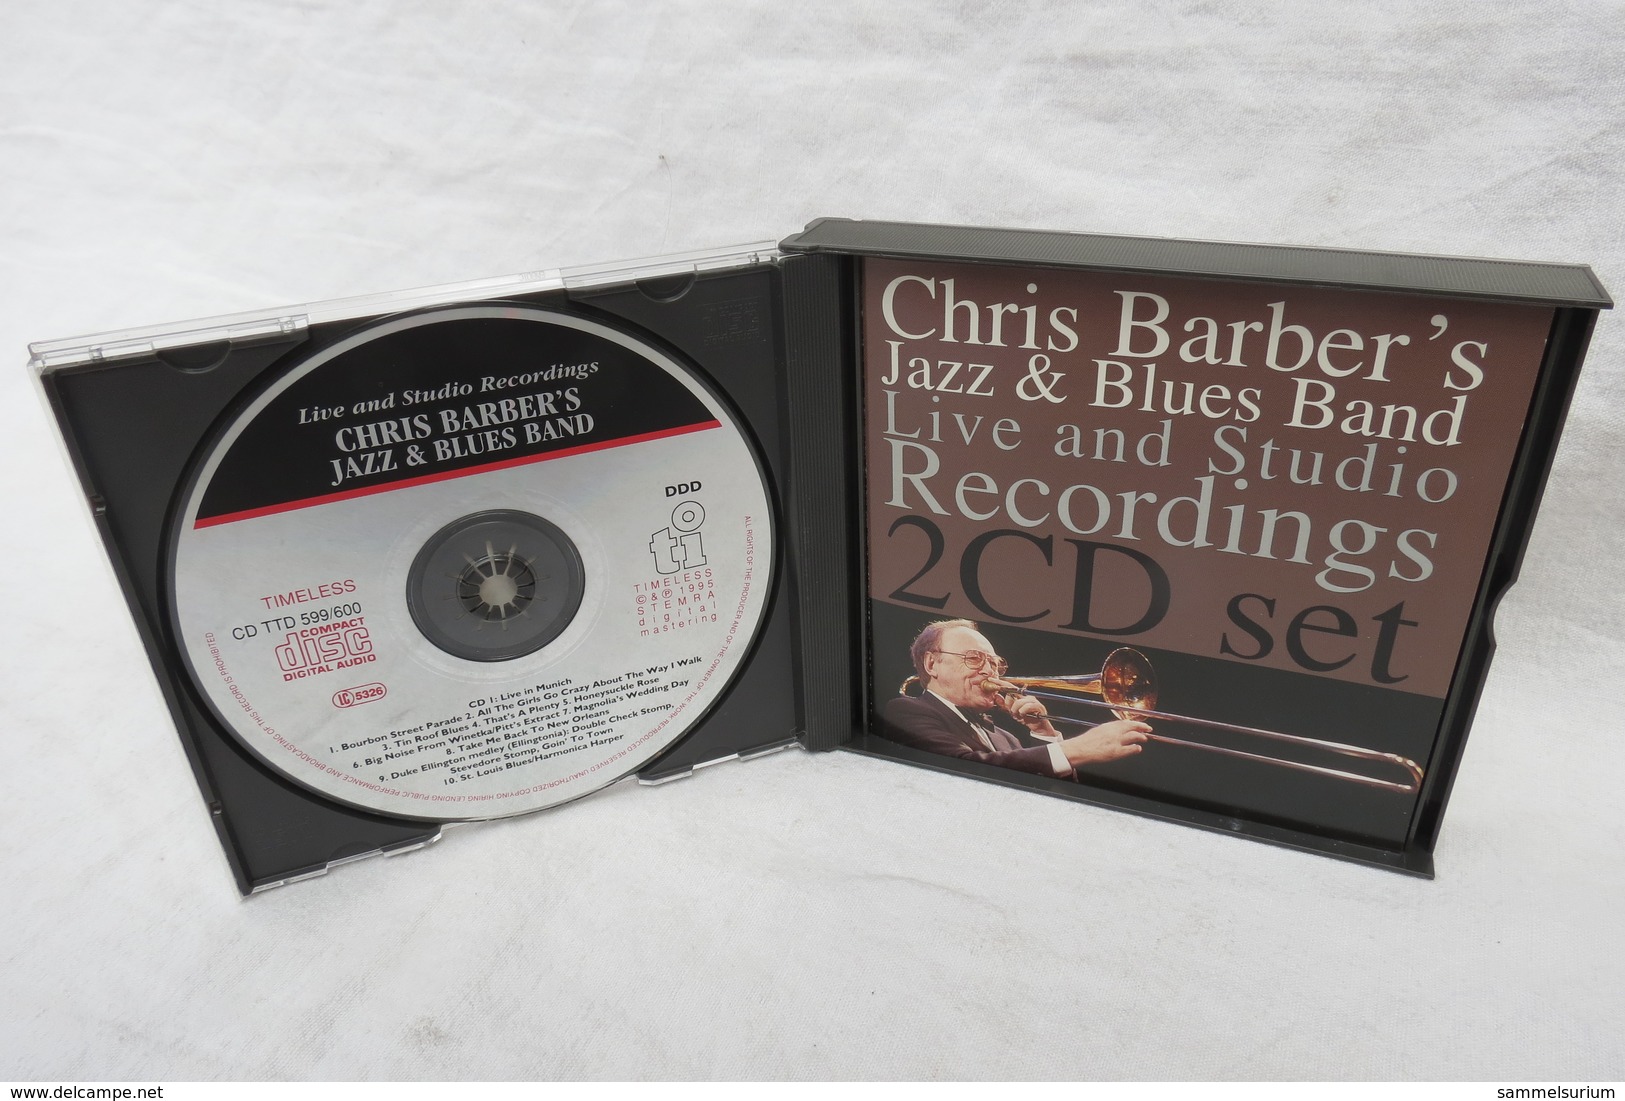 2 CDs "Chris Barber's Jazz & Blues Band" Live And Studio Recordings - Jazz